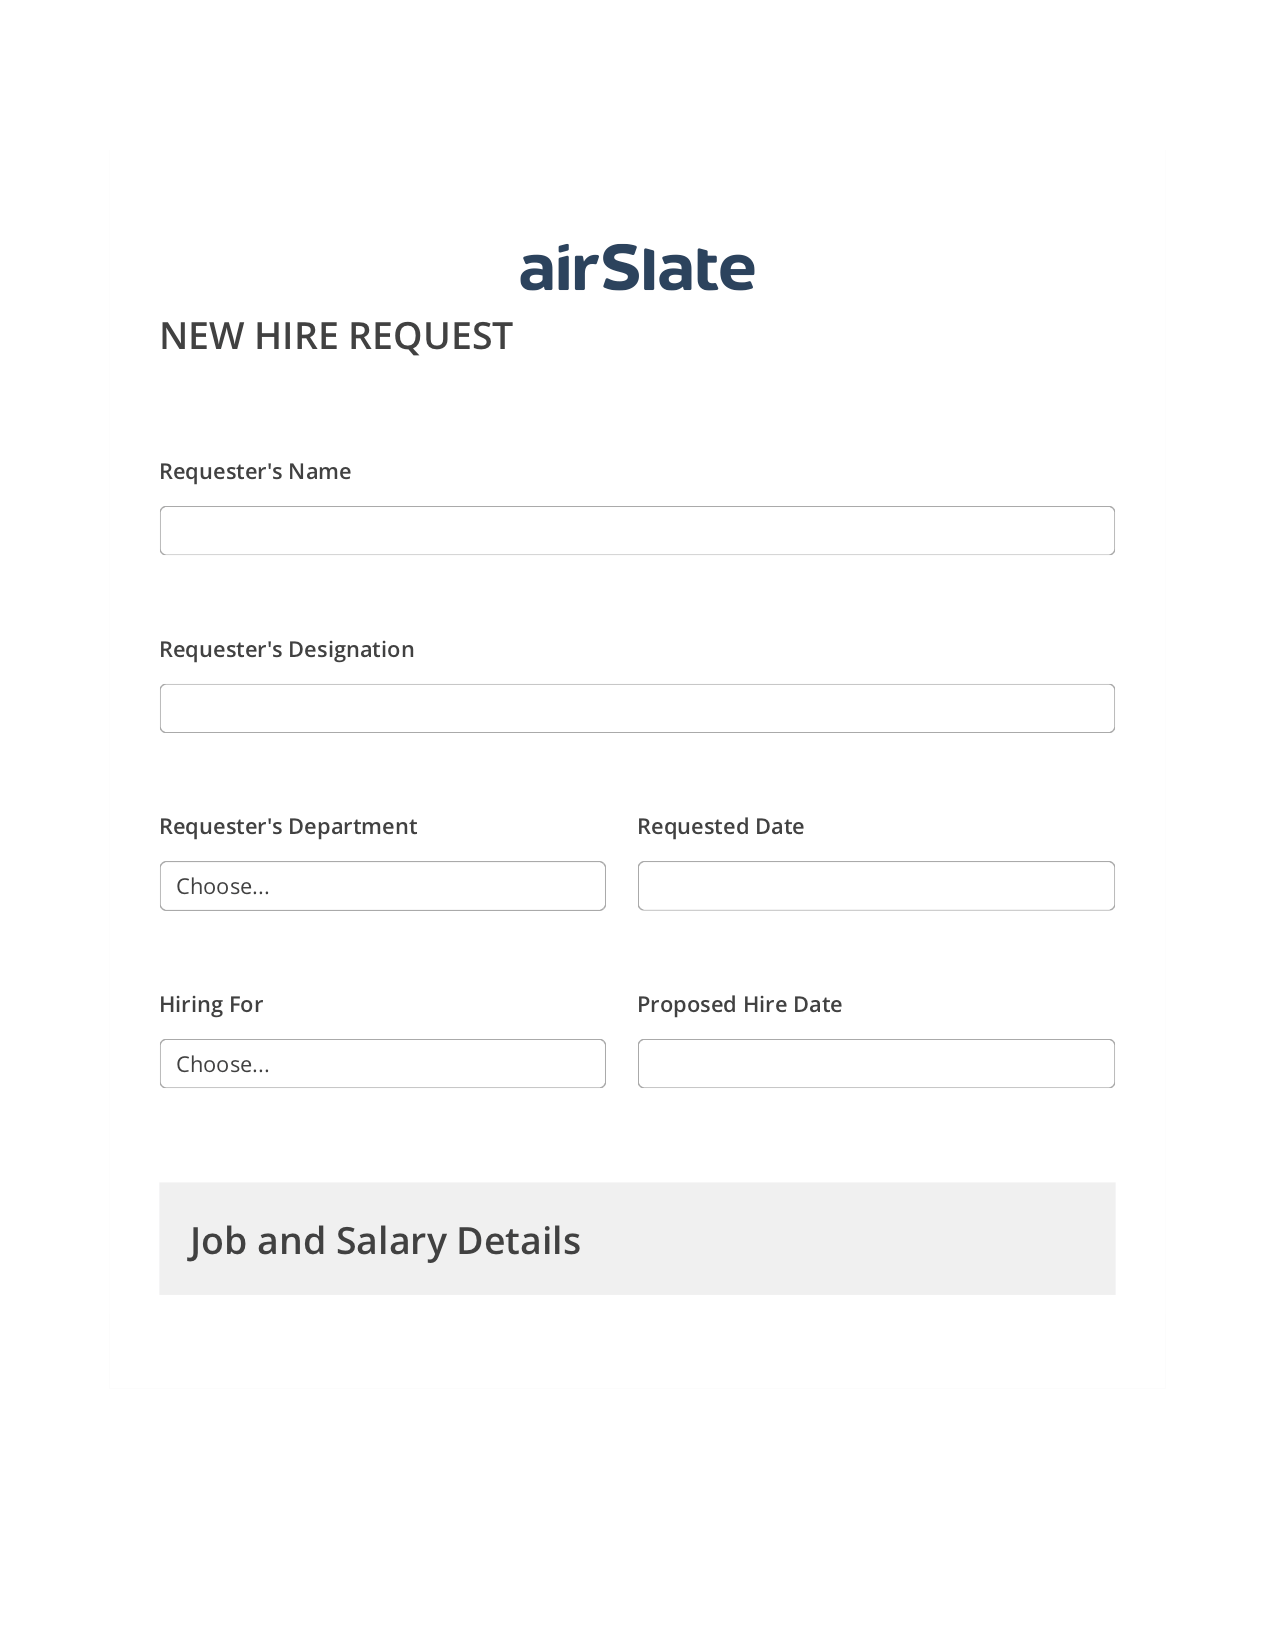 Multirole Hiring Request Workflow Pre-fill from Google Sheets Bot, Send a Slate with Roles Bot, Export to Excel 365 Bot